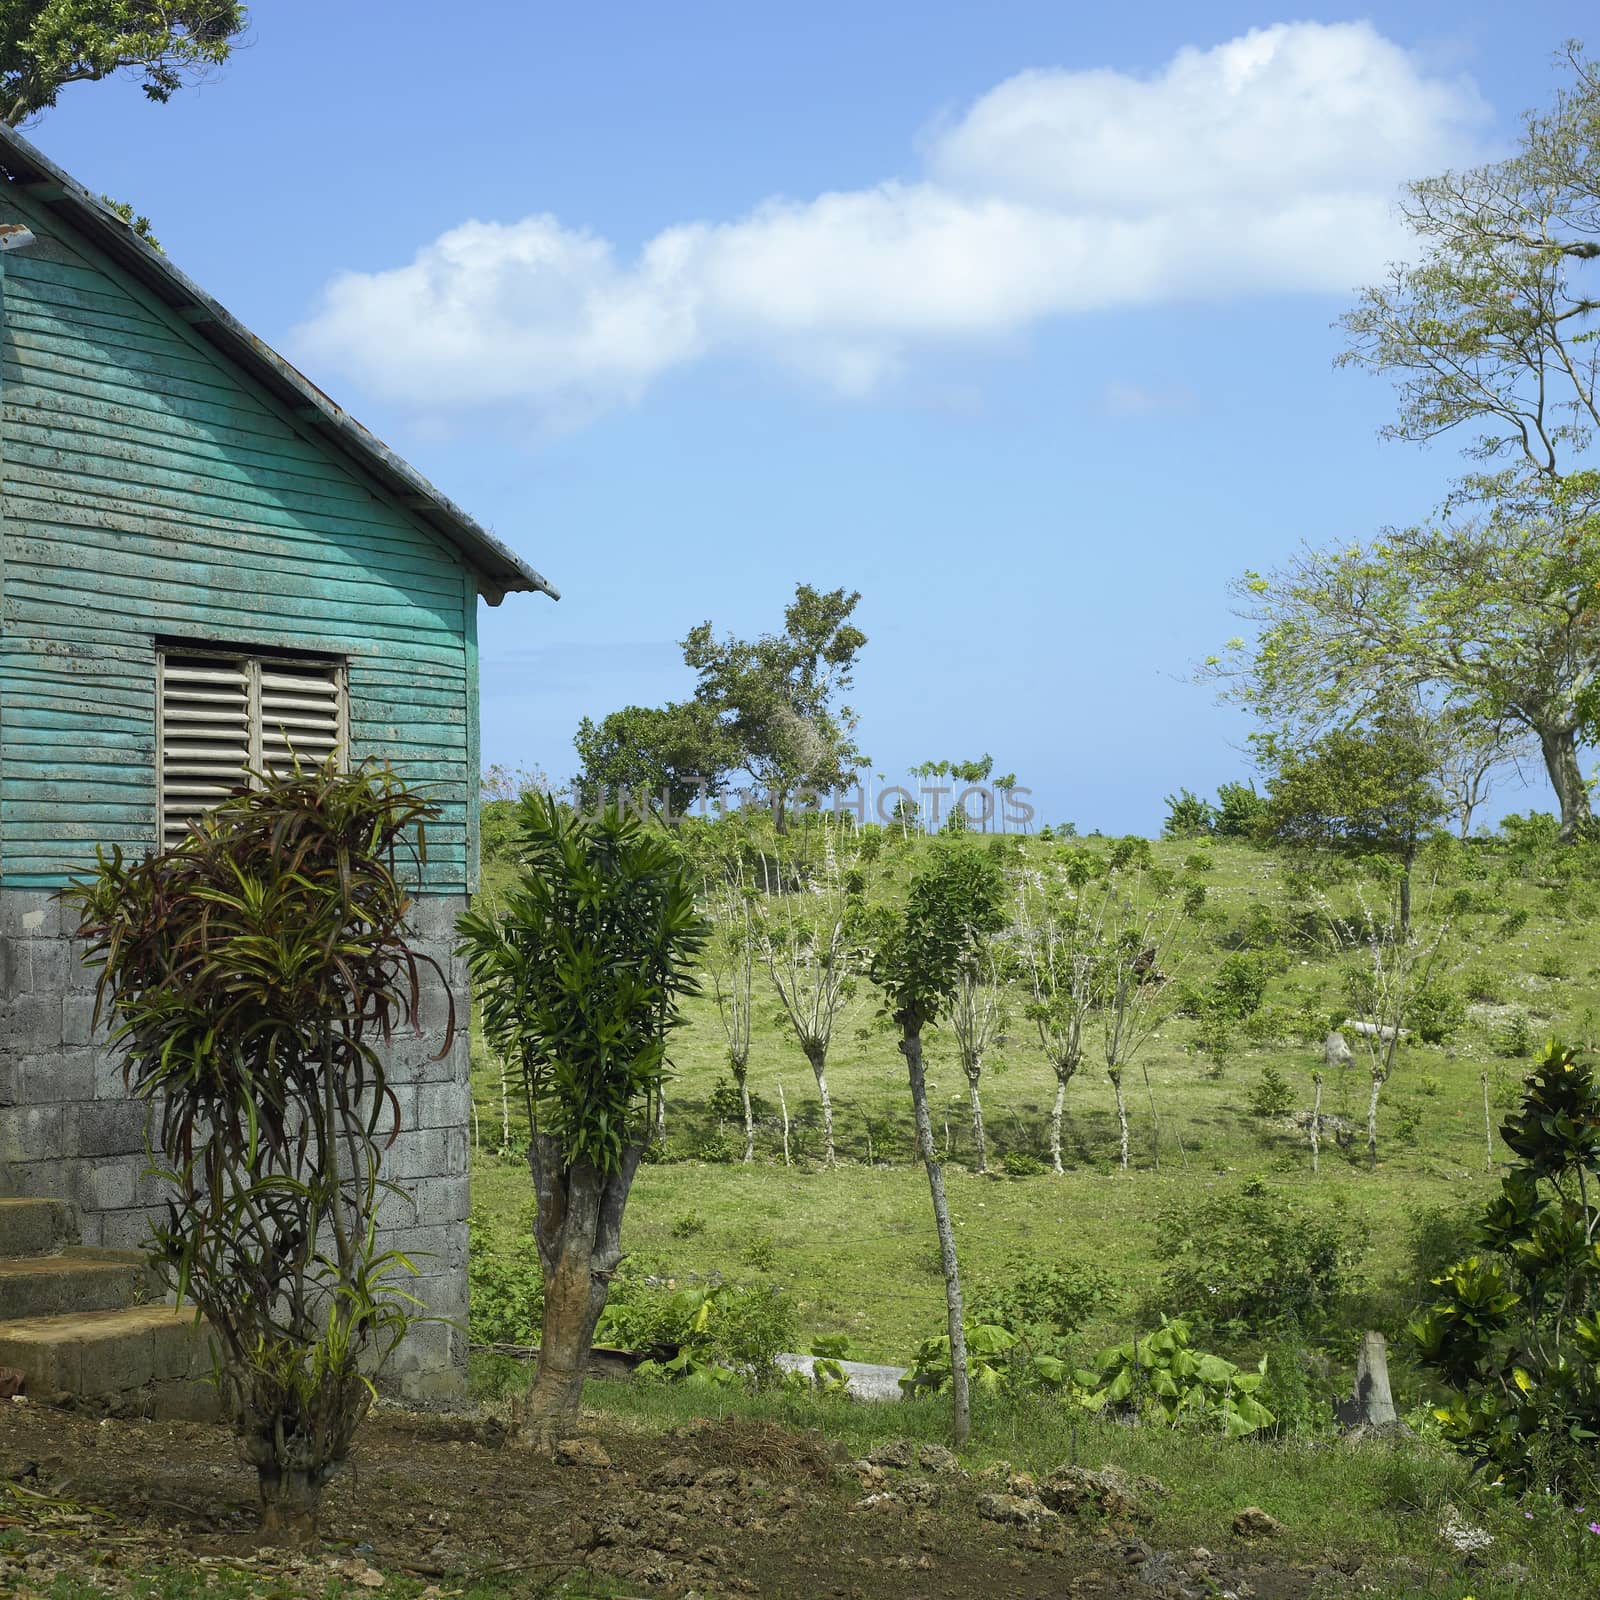 Plants and trees grow near a home in the topics on a lush hillside